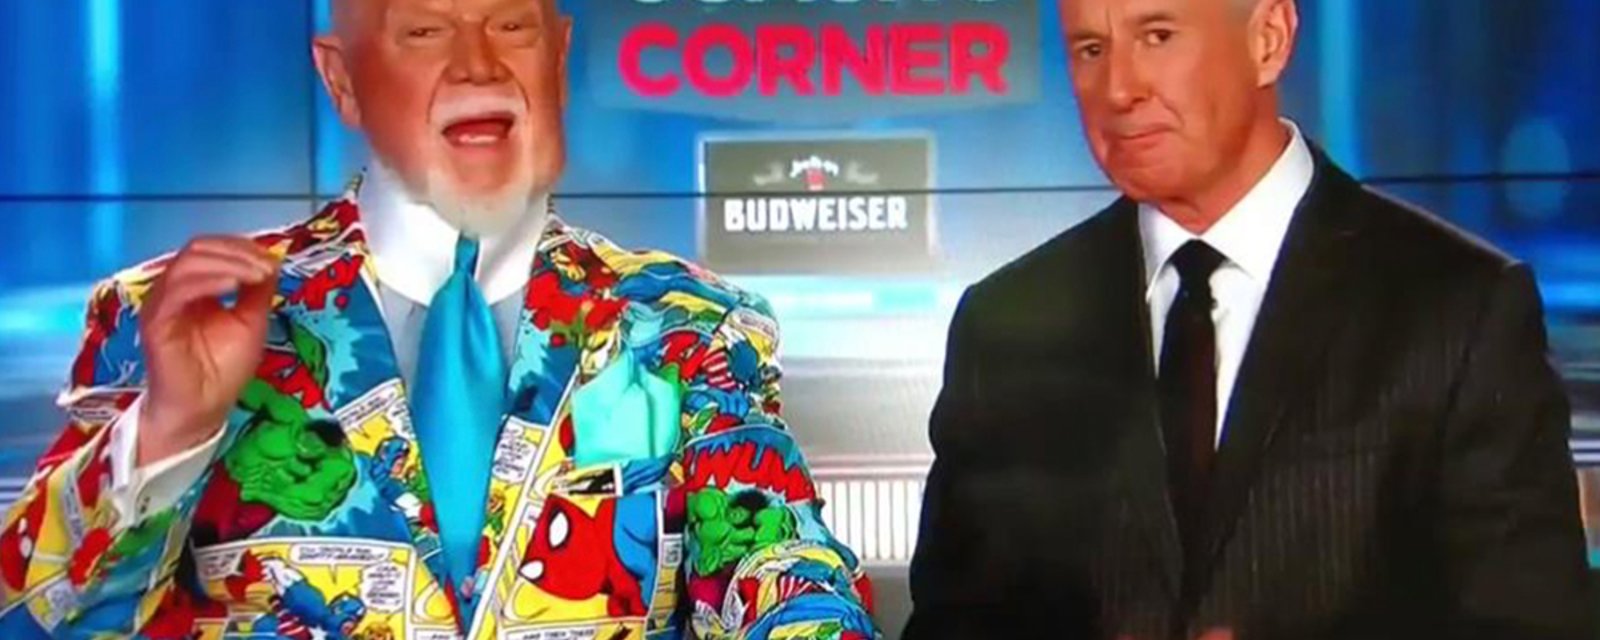 Don Cherry absolutely RIPS William Nylander on Coach’s Corner